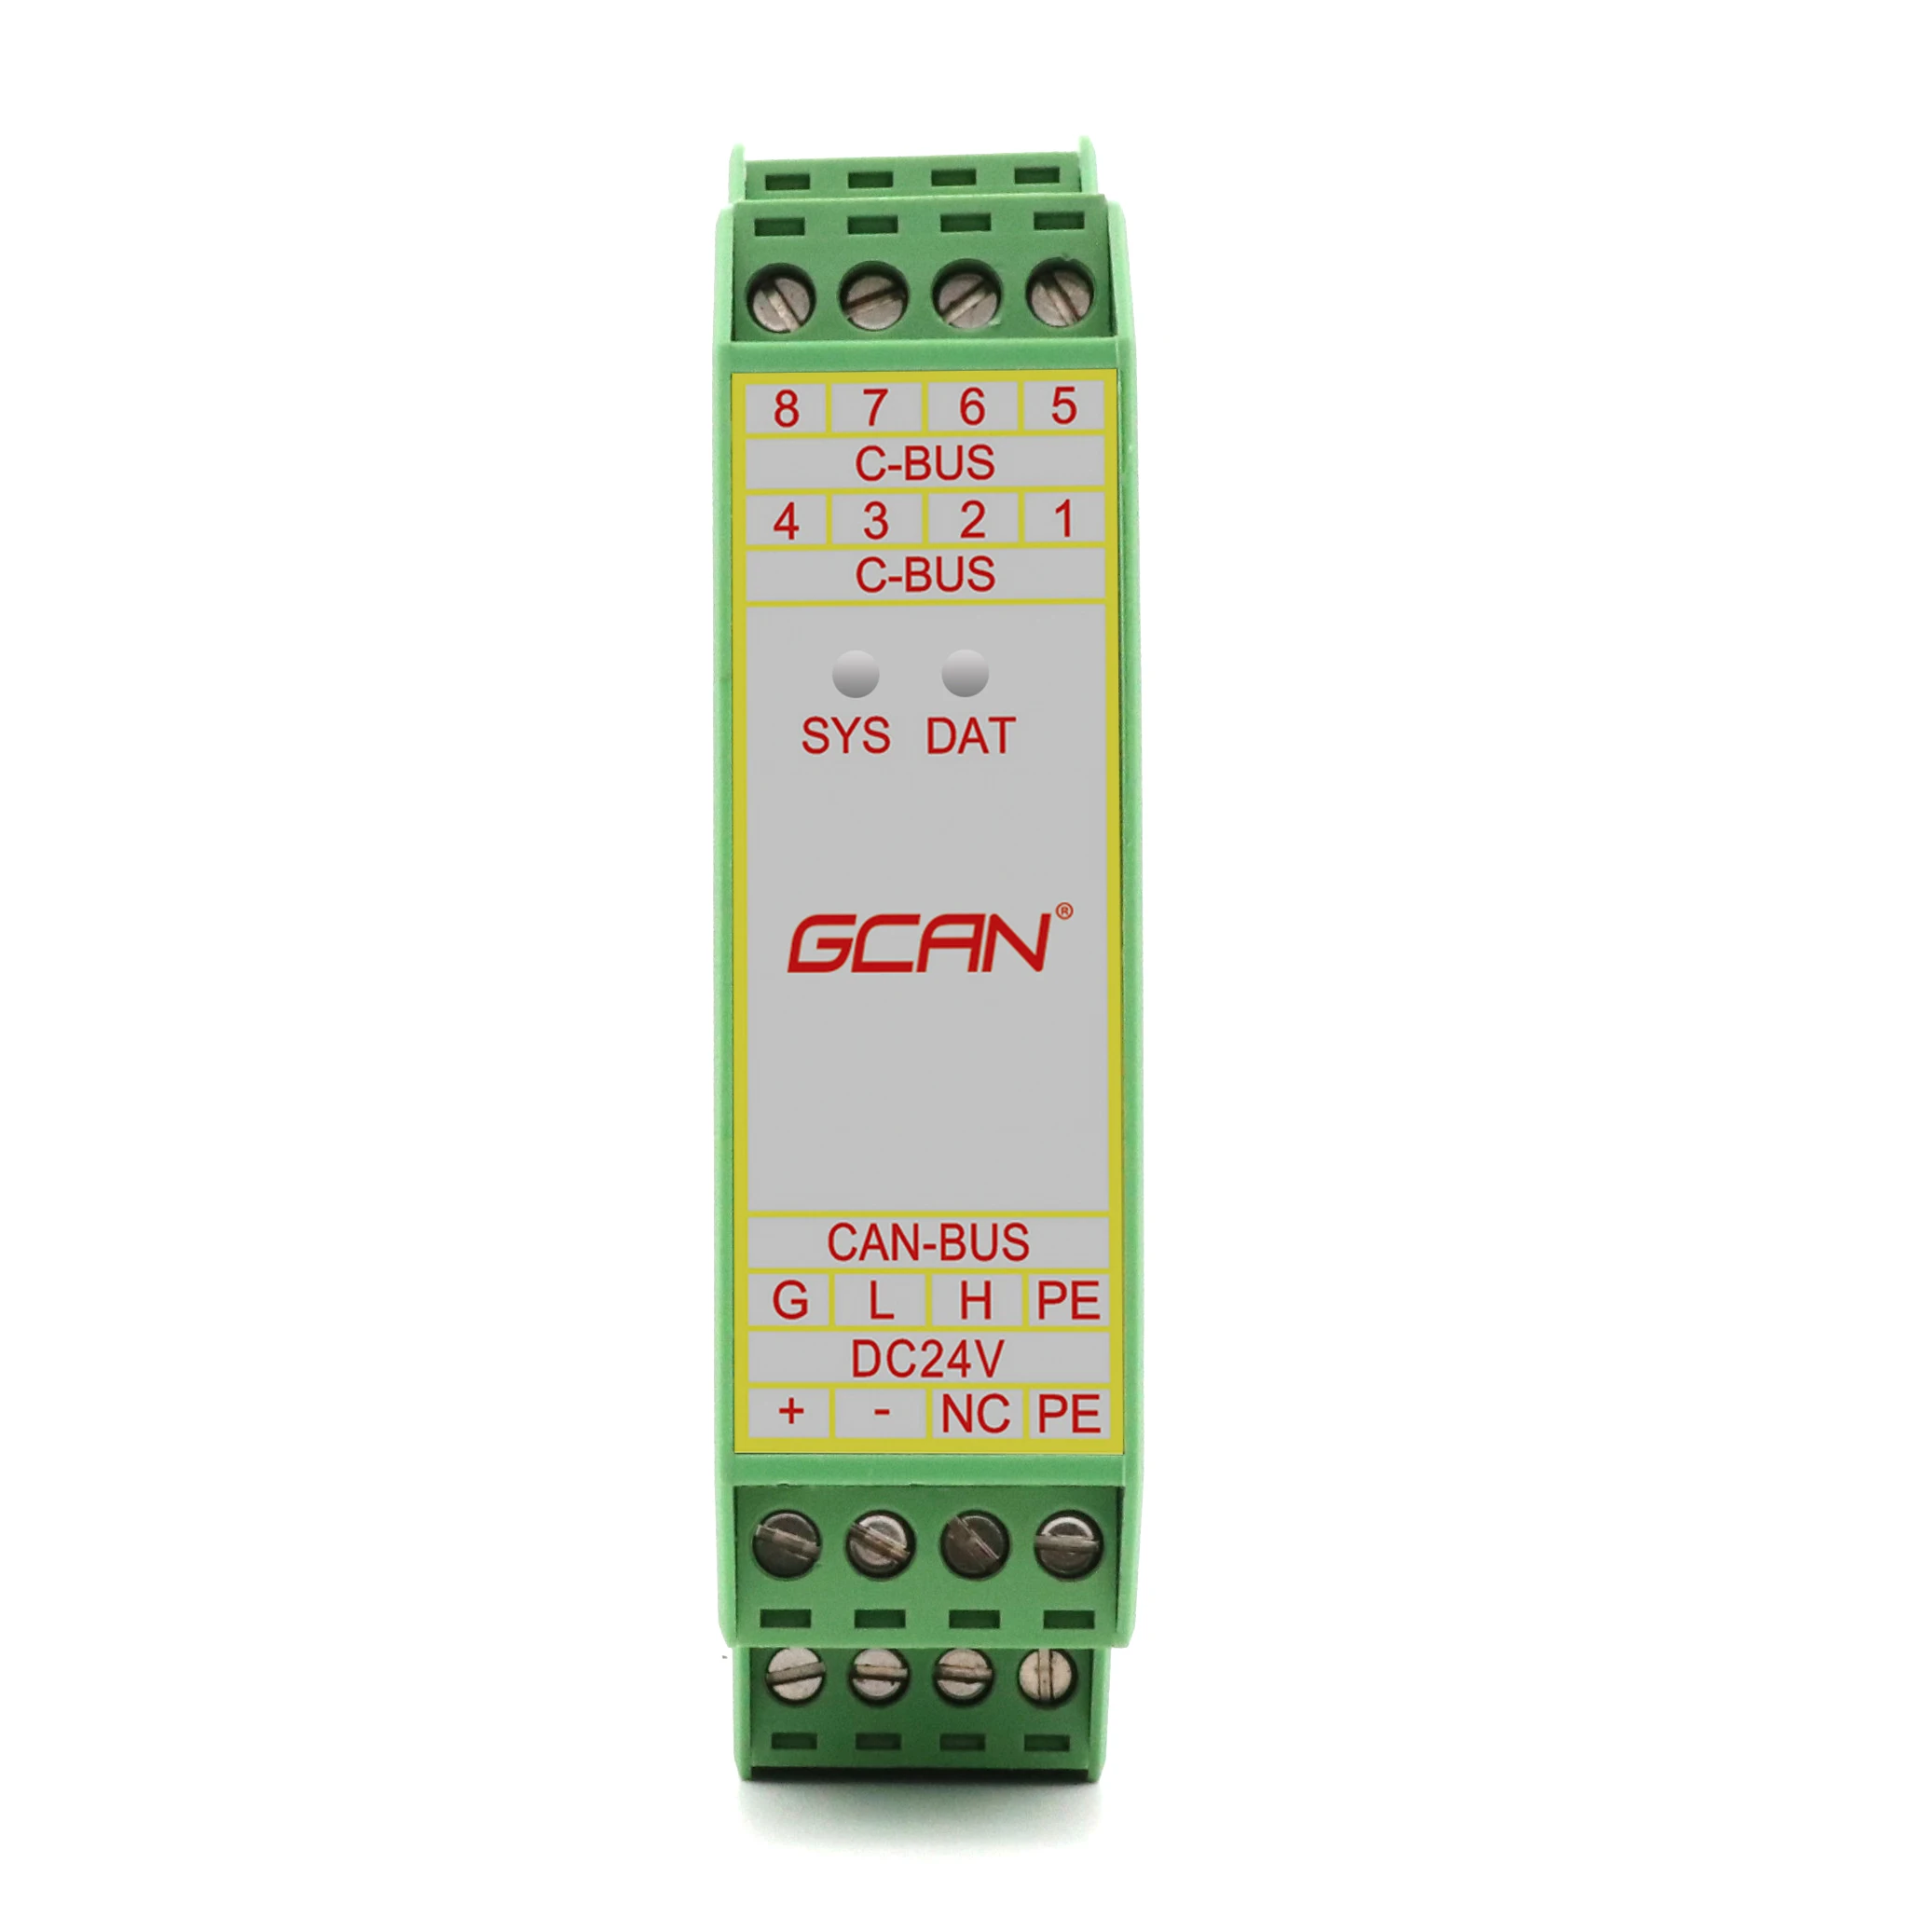 GCAN-206 Network Management Converter Repeater Anti-Interference Ability ID Filter Conversion And Data Conversion